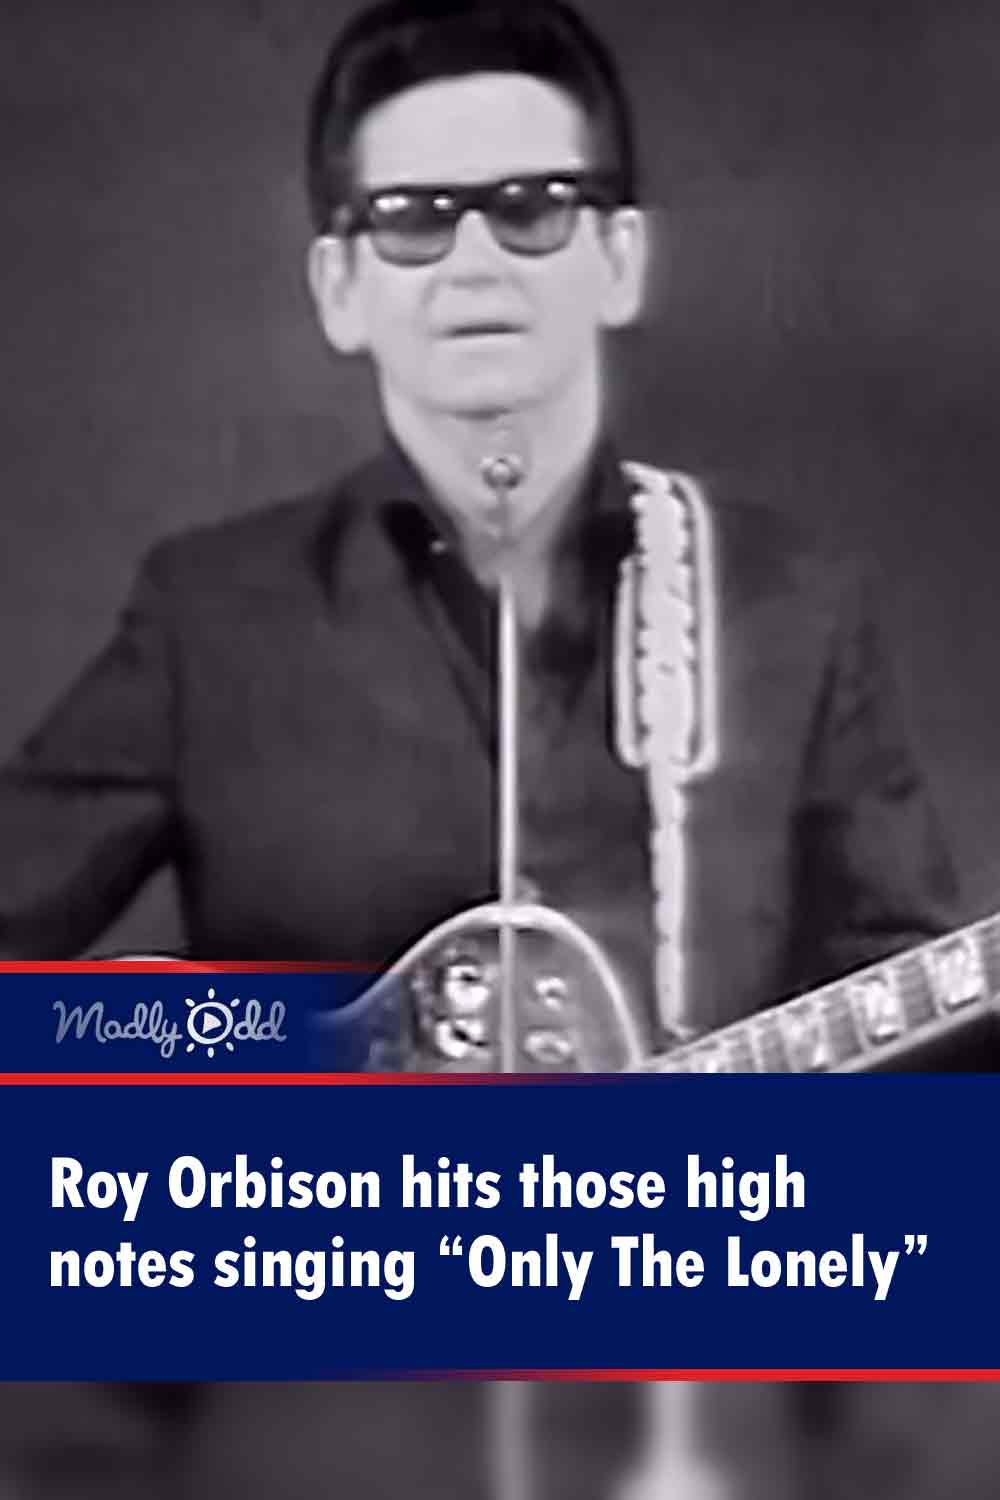 Roy Orbison hits those high notes singing “Only The Lonely”